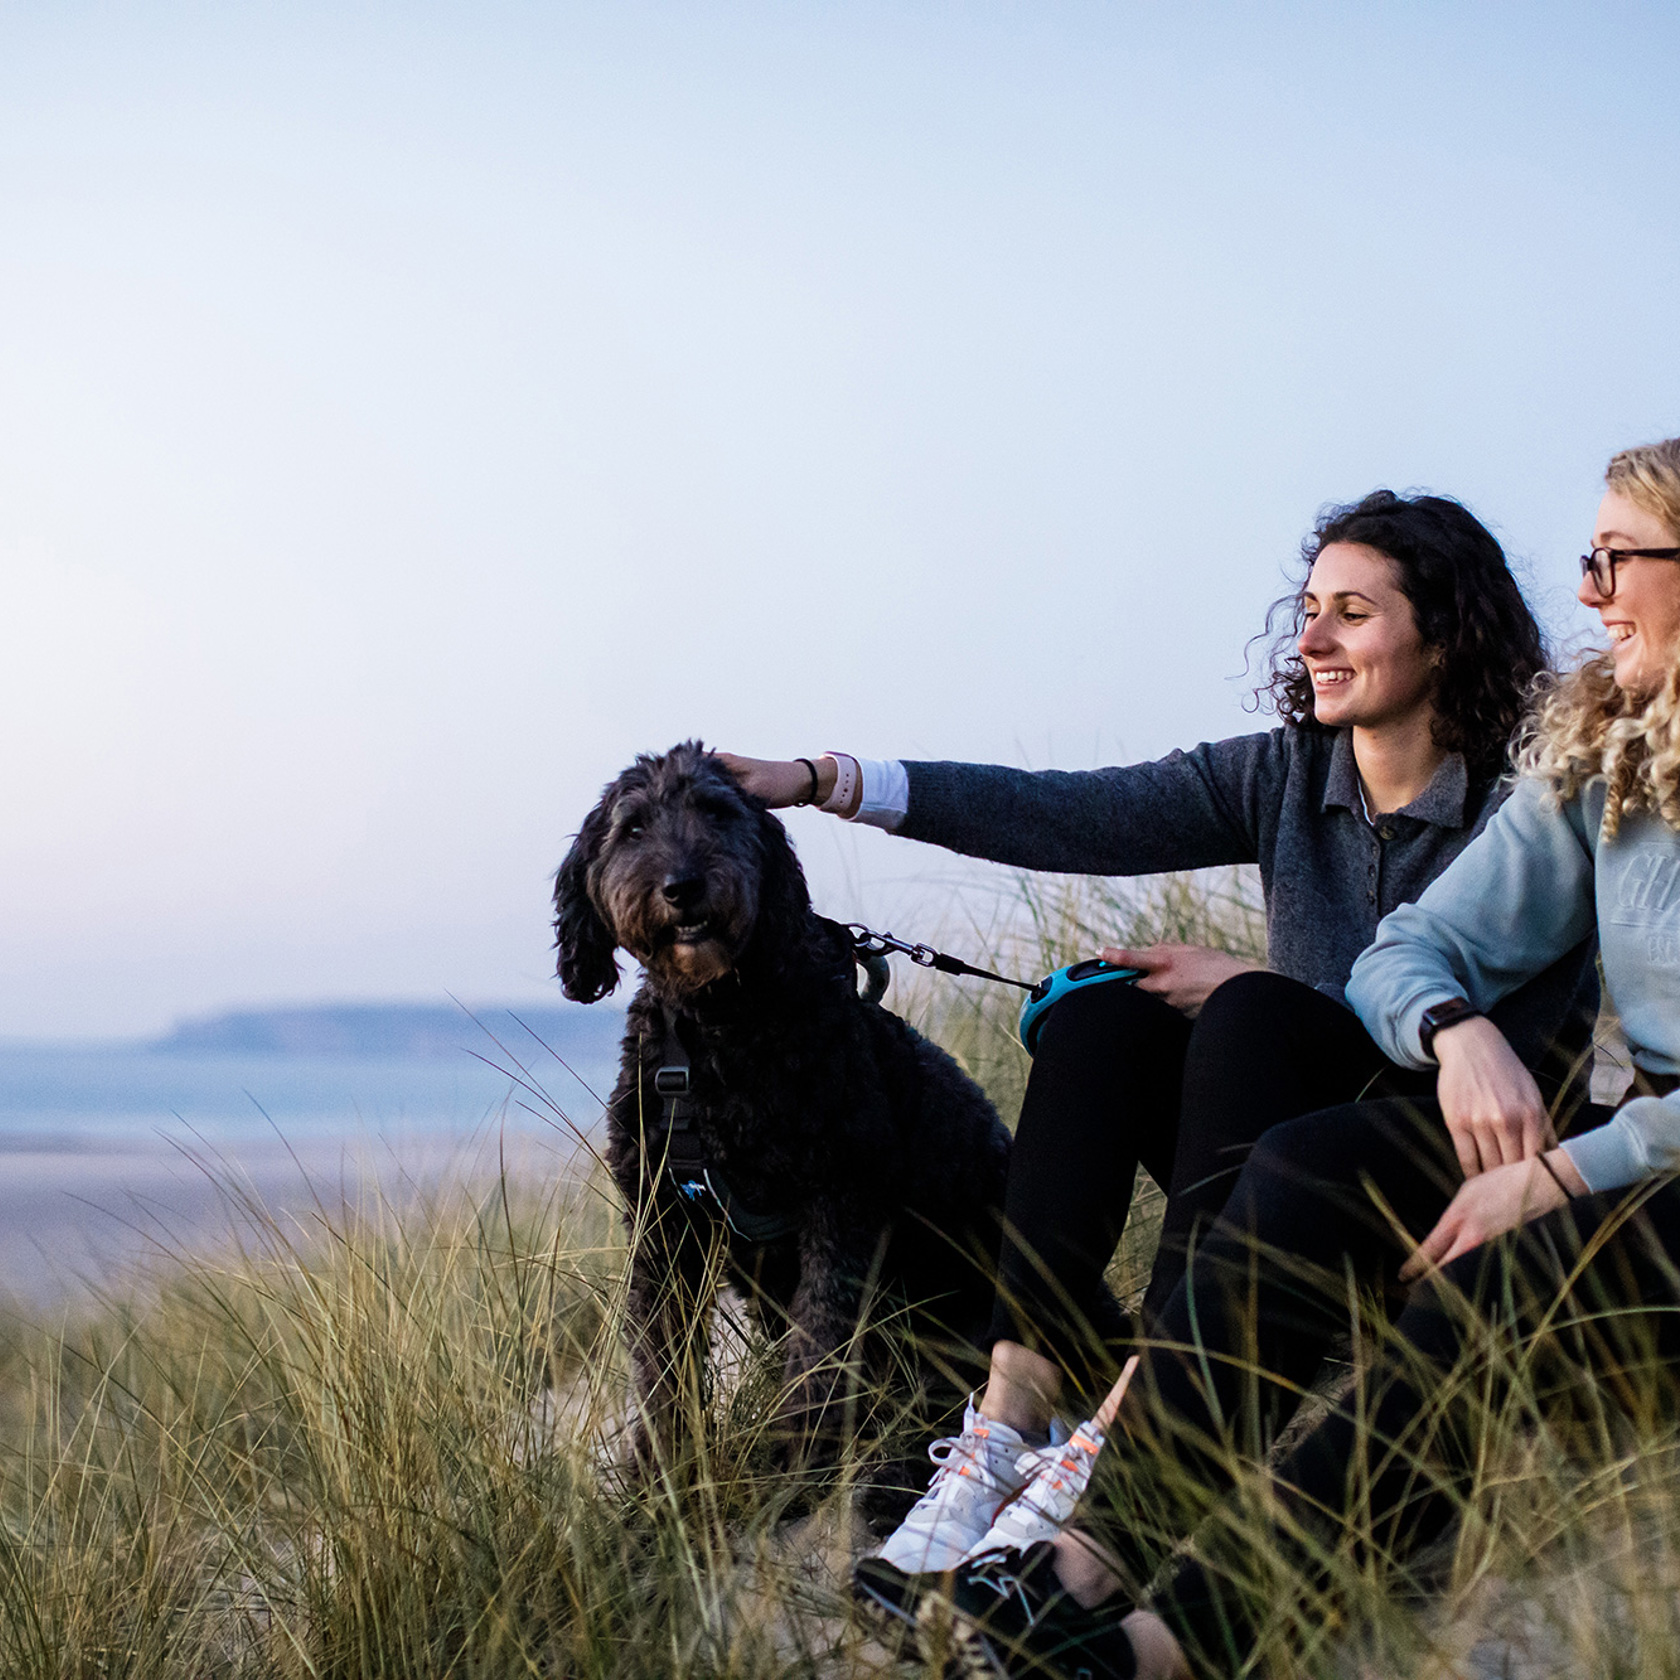 Two female friends sit on the sand dunes at St Ouens, the girl on the left pats a black dog.